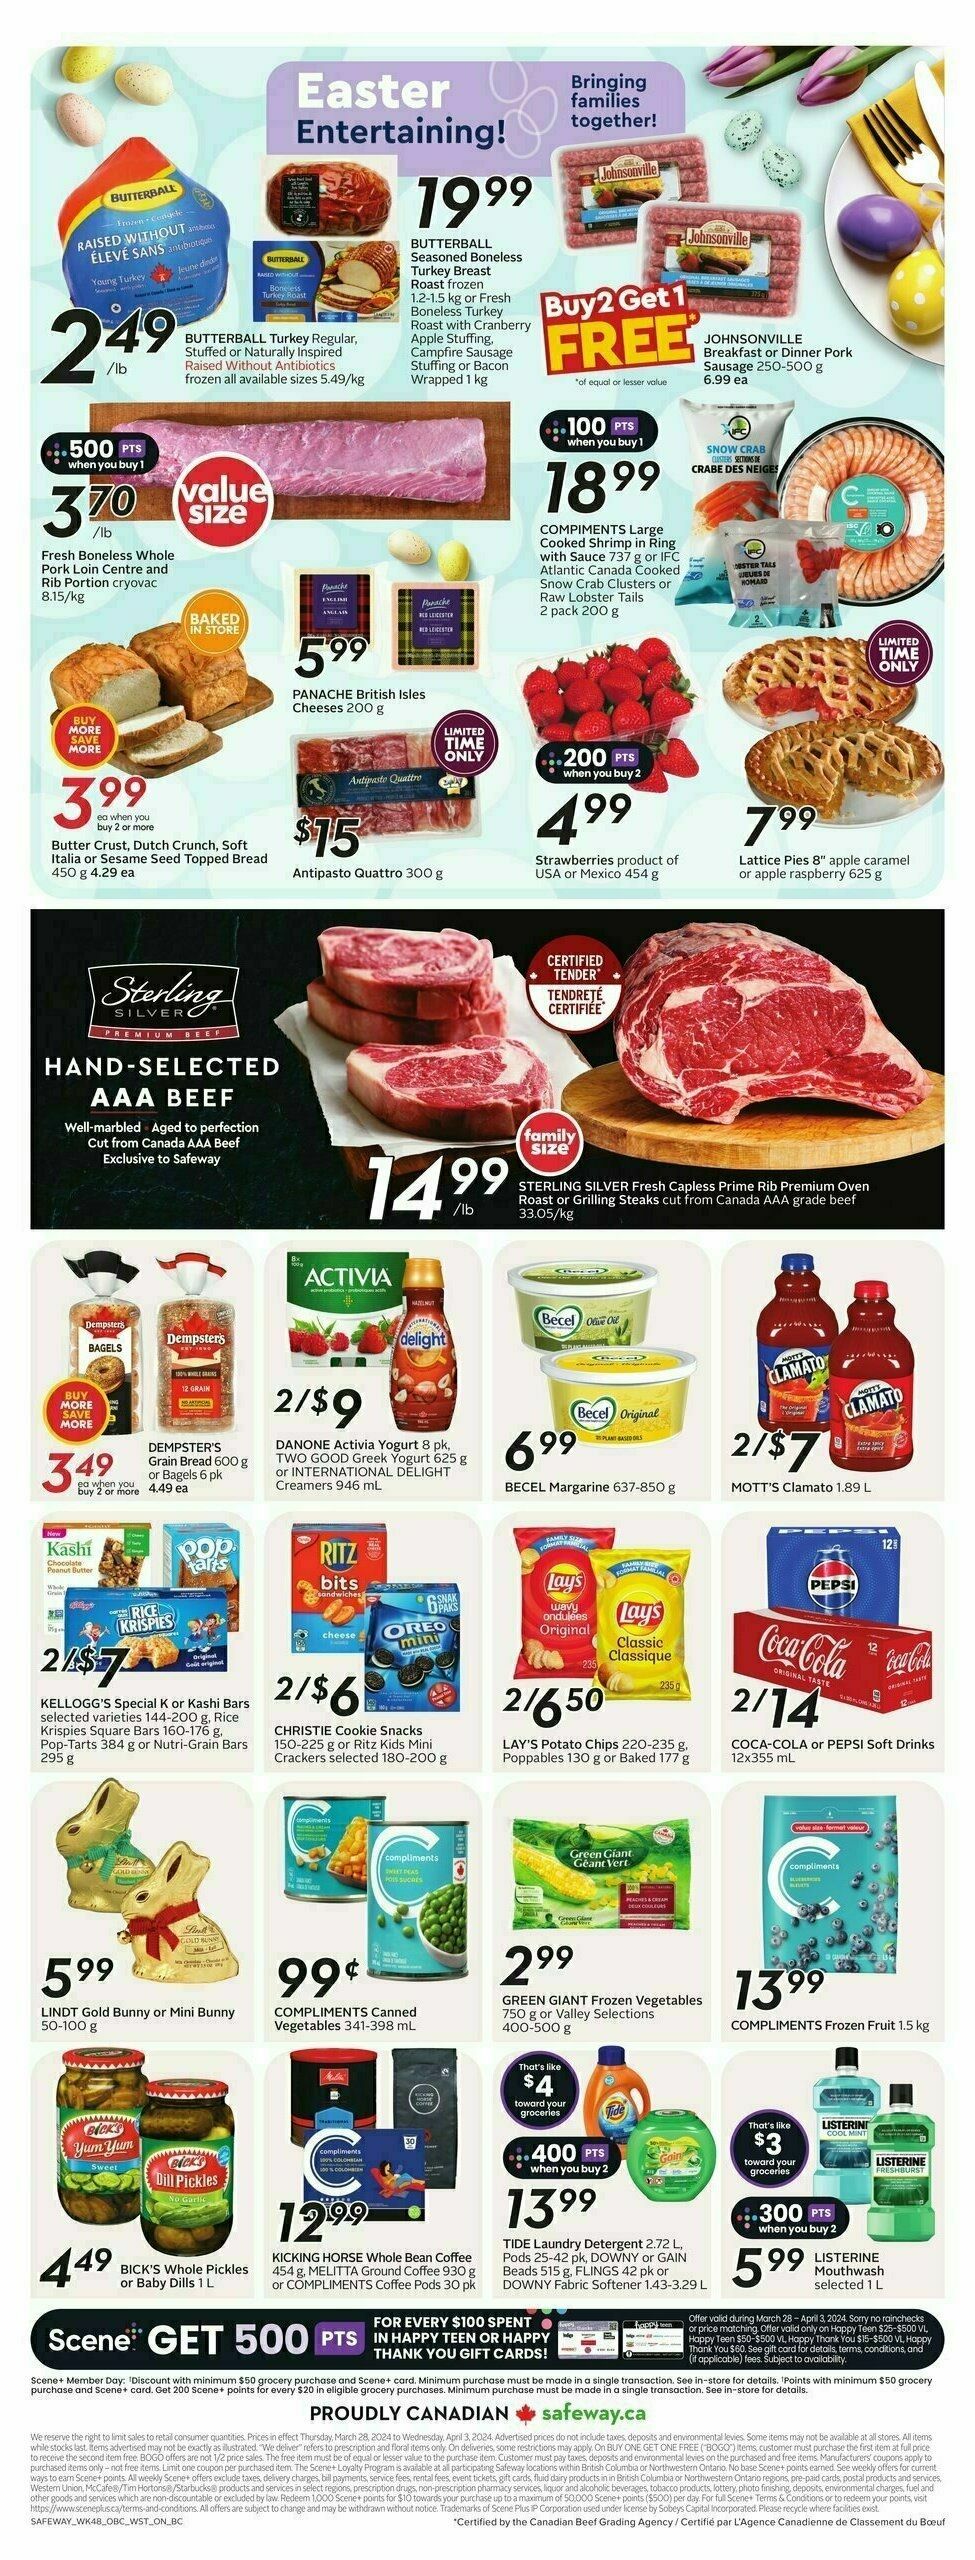 Safeway Flyer from March 28